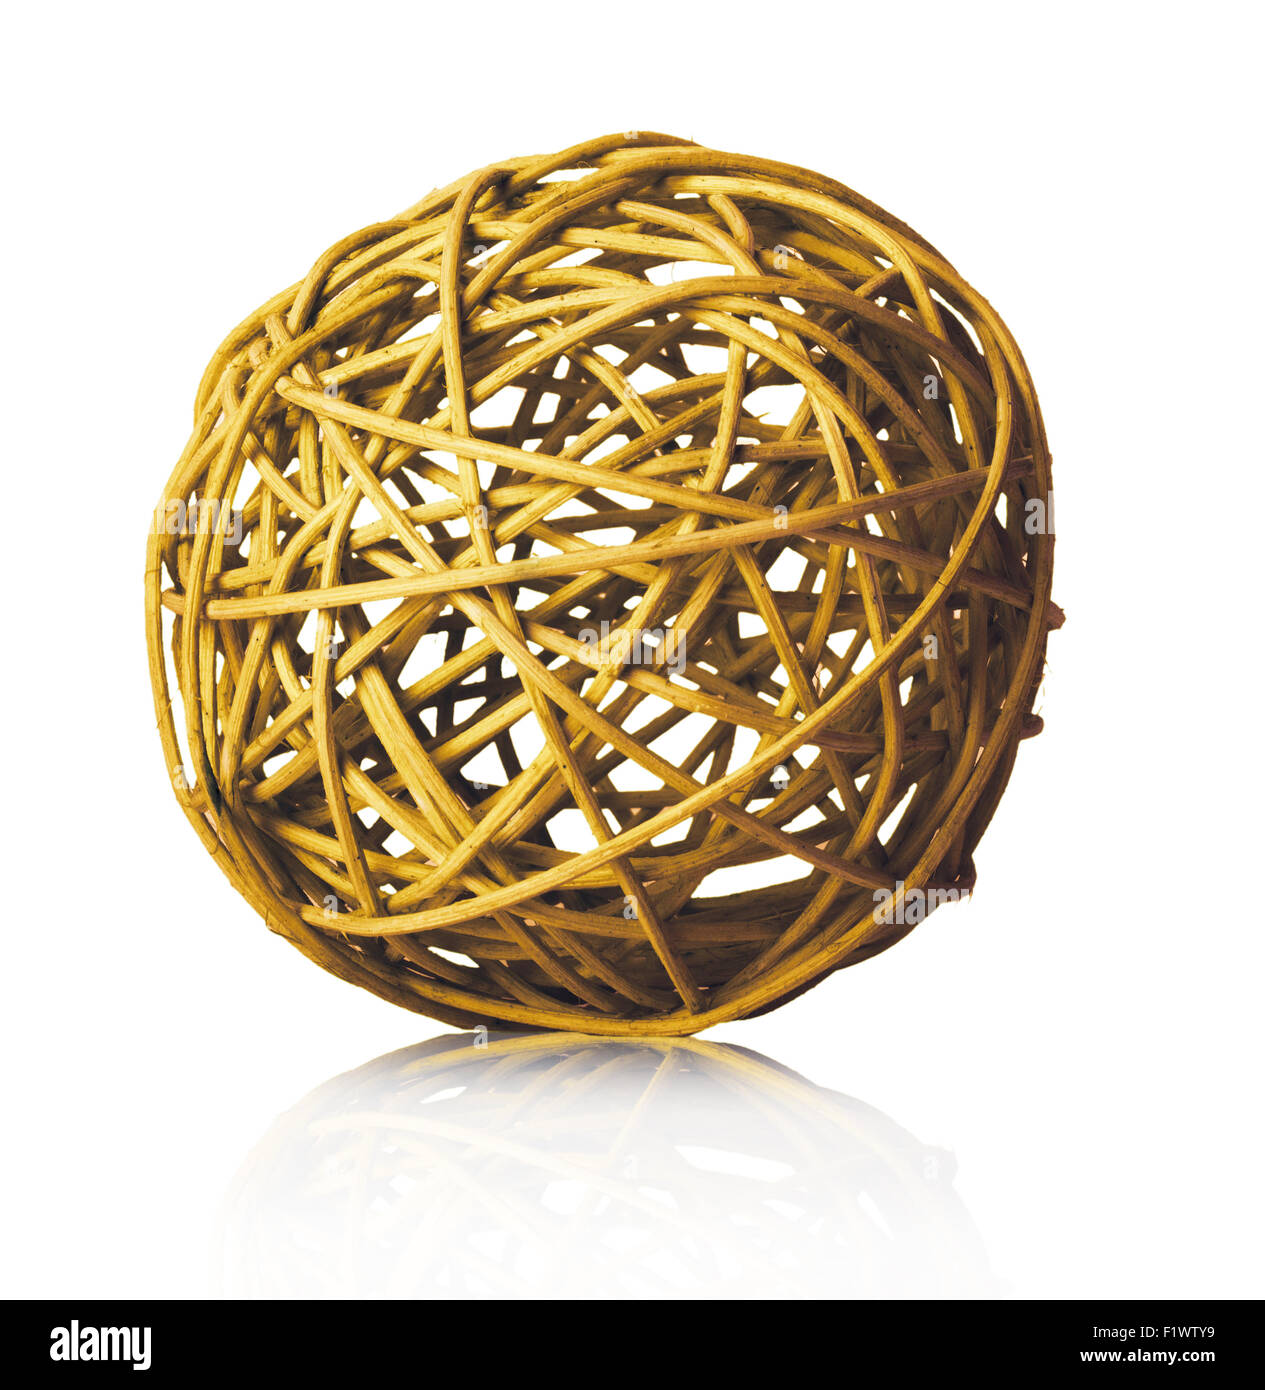 golden ball of yarn on the white background. Stock Photo